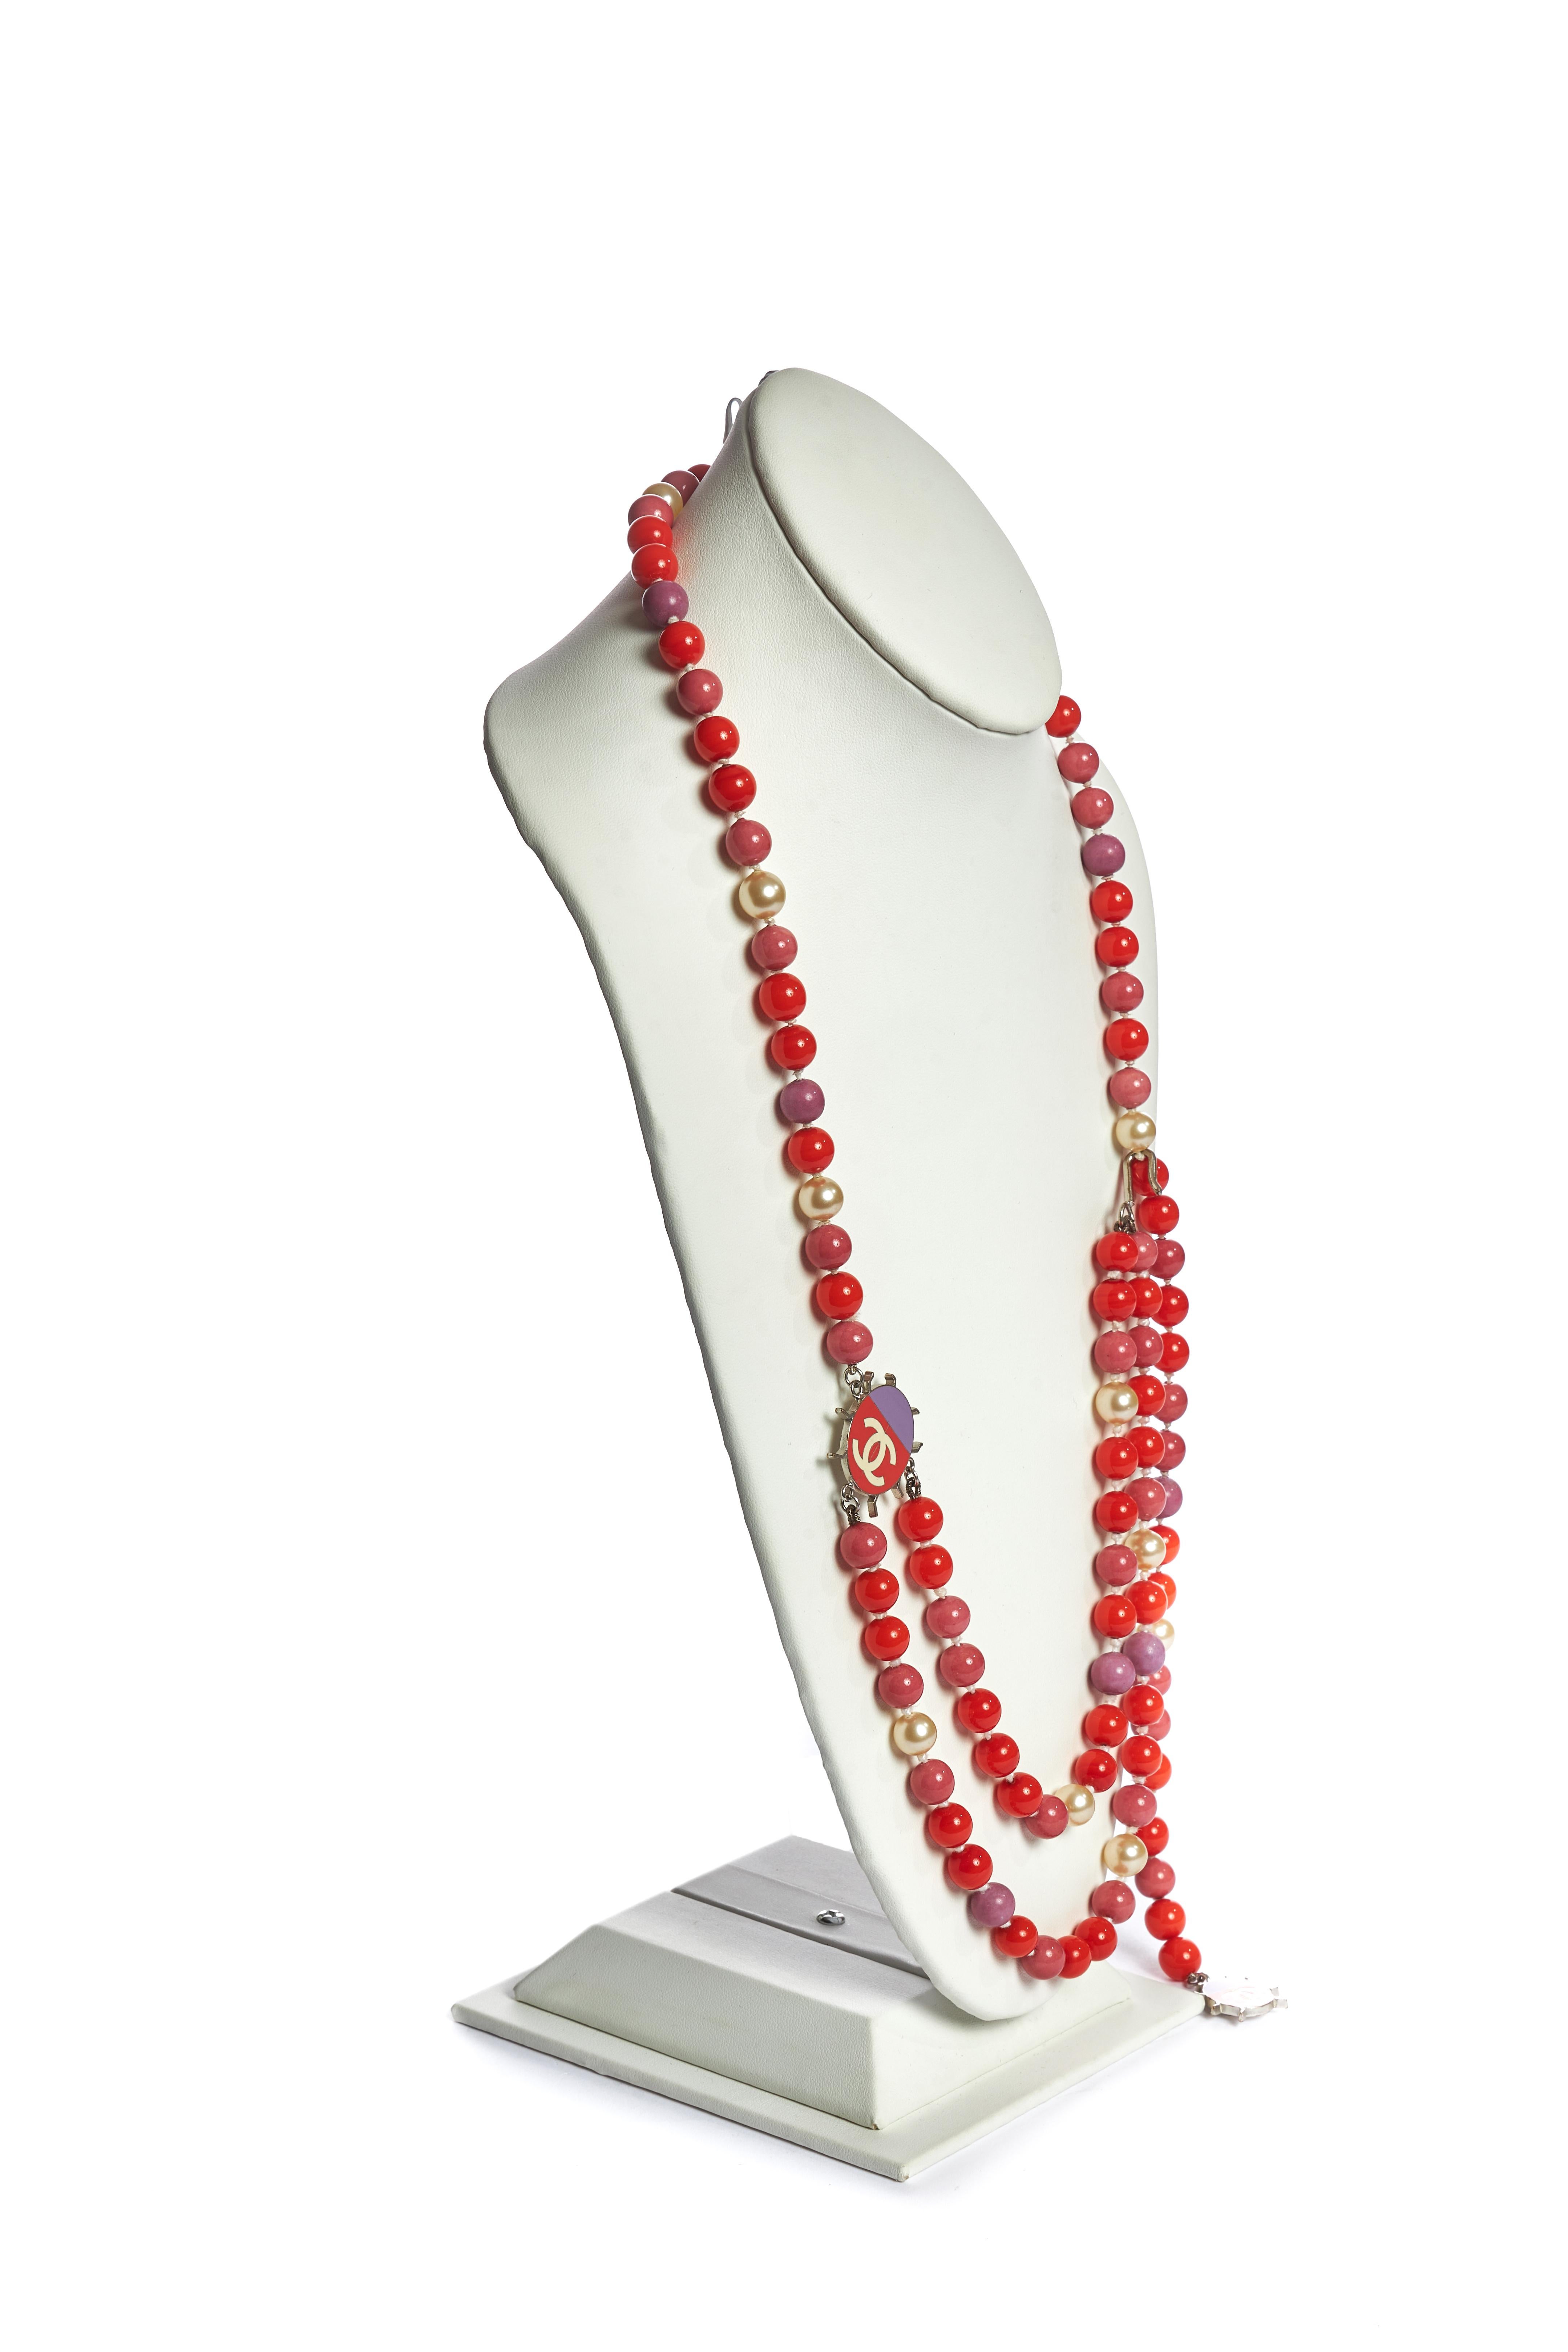 Chanel long double belt/ necklace in coral and pink gripoix beads with pearl accents. Spring 2004 collection. Pendant: Length 1